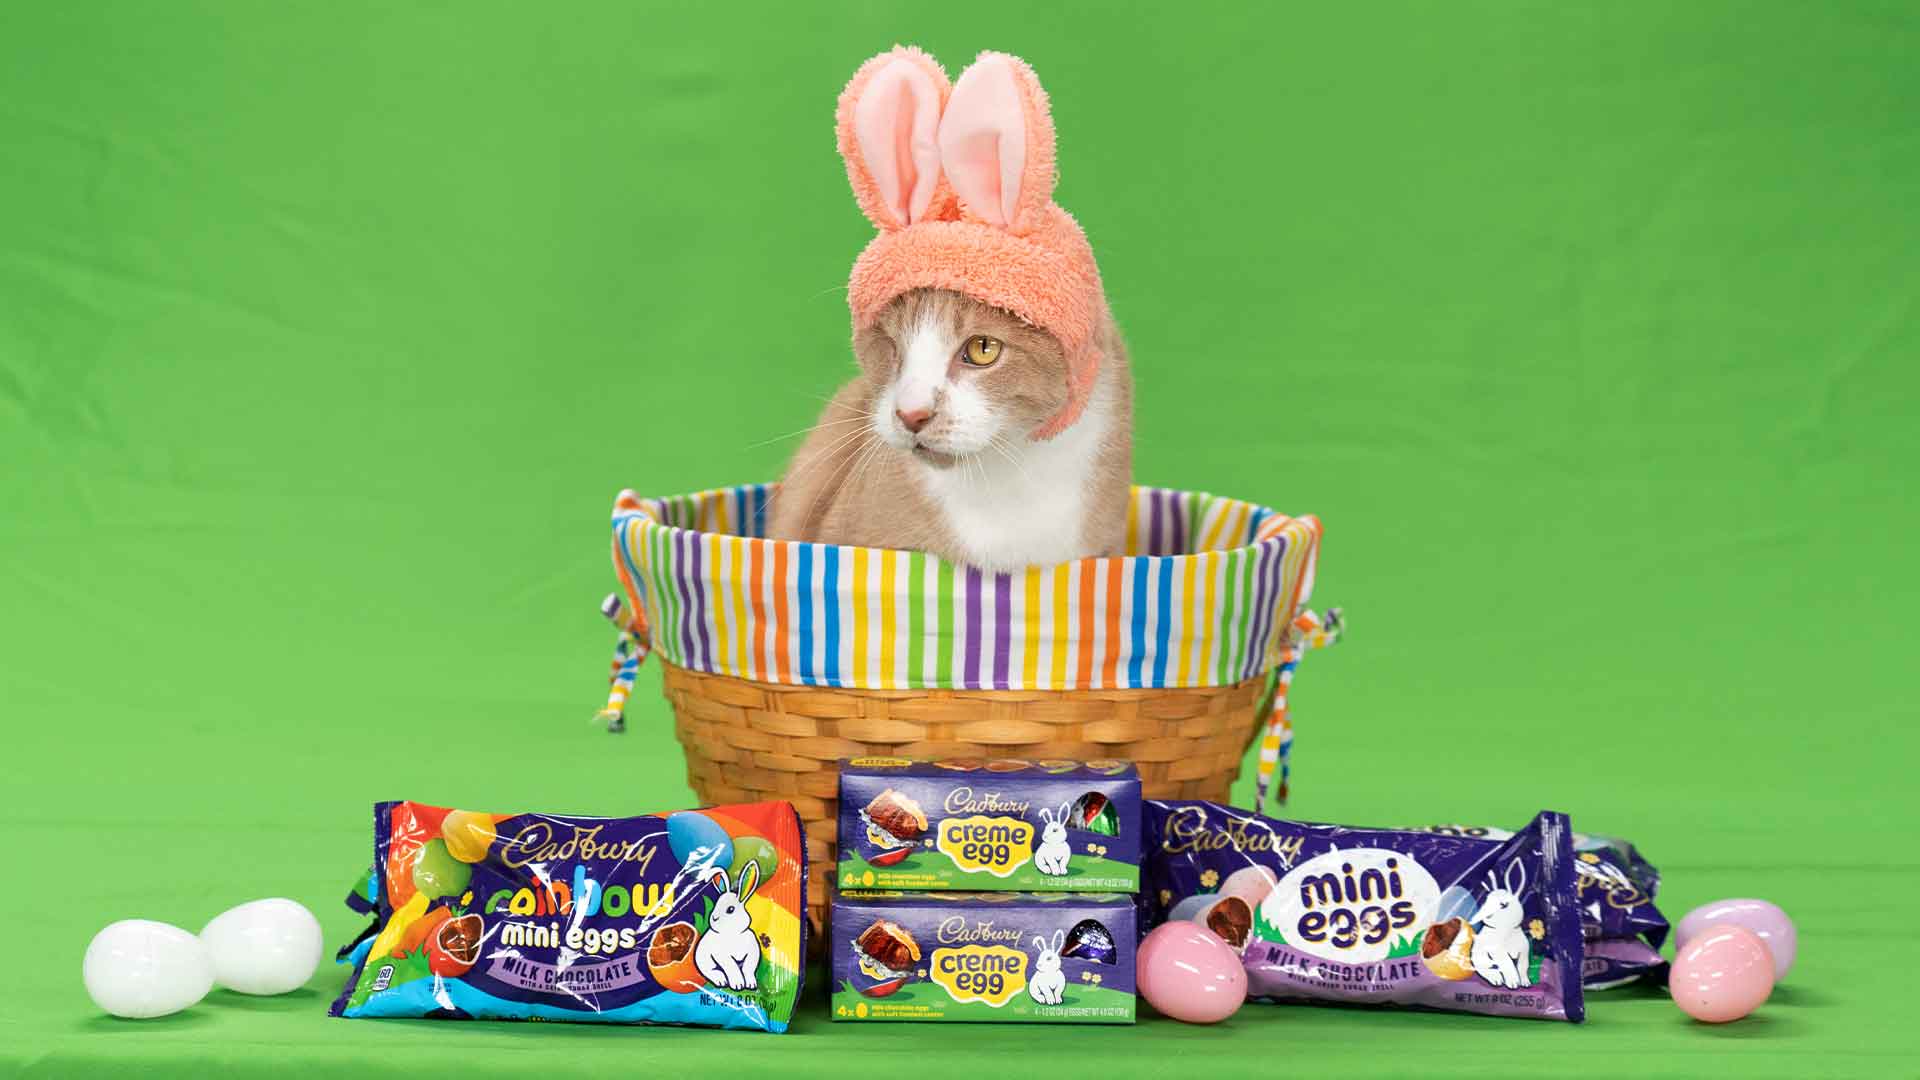 Cadbury announces rescue cat as the winner of Bunny Tryouts